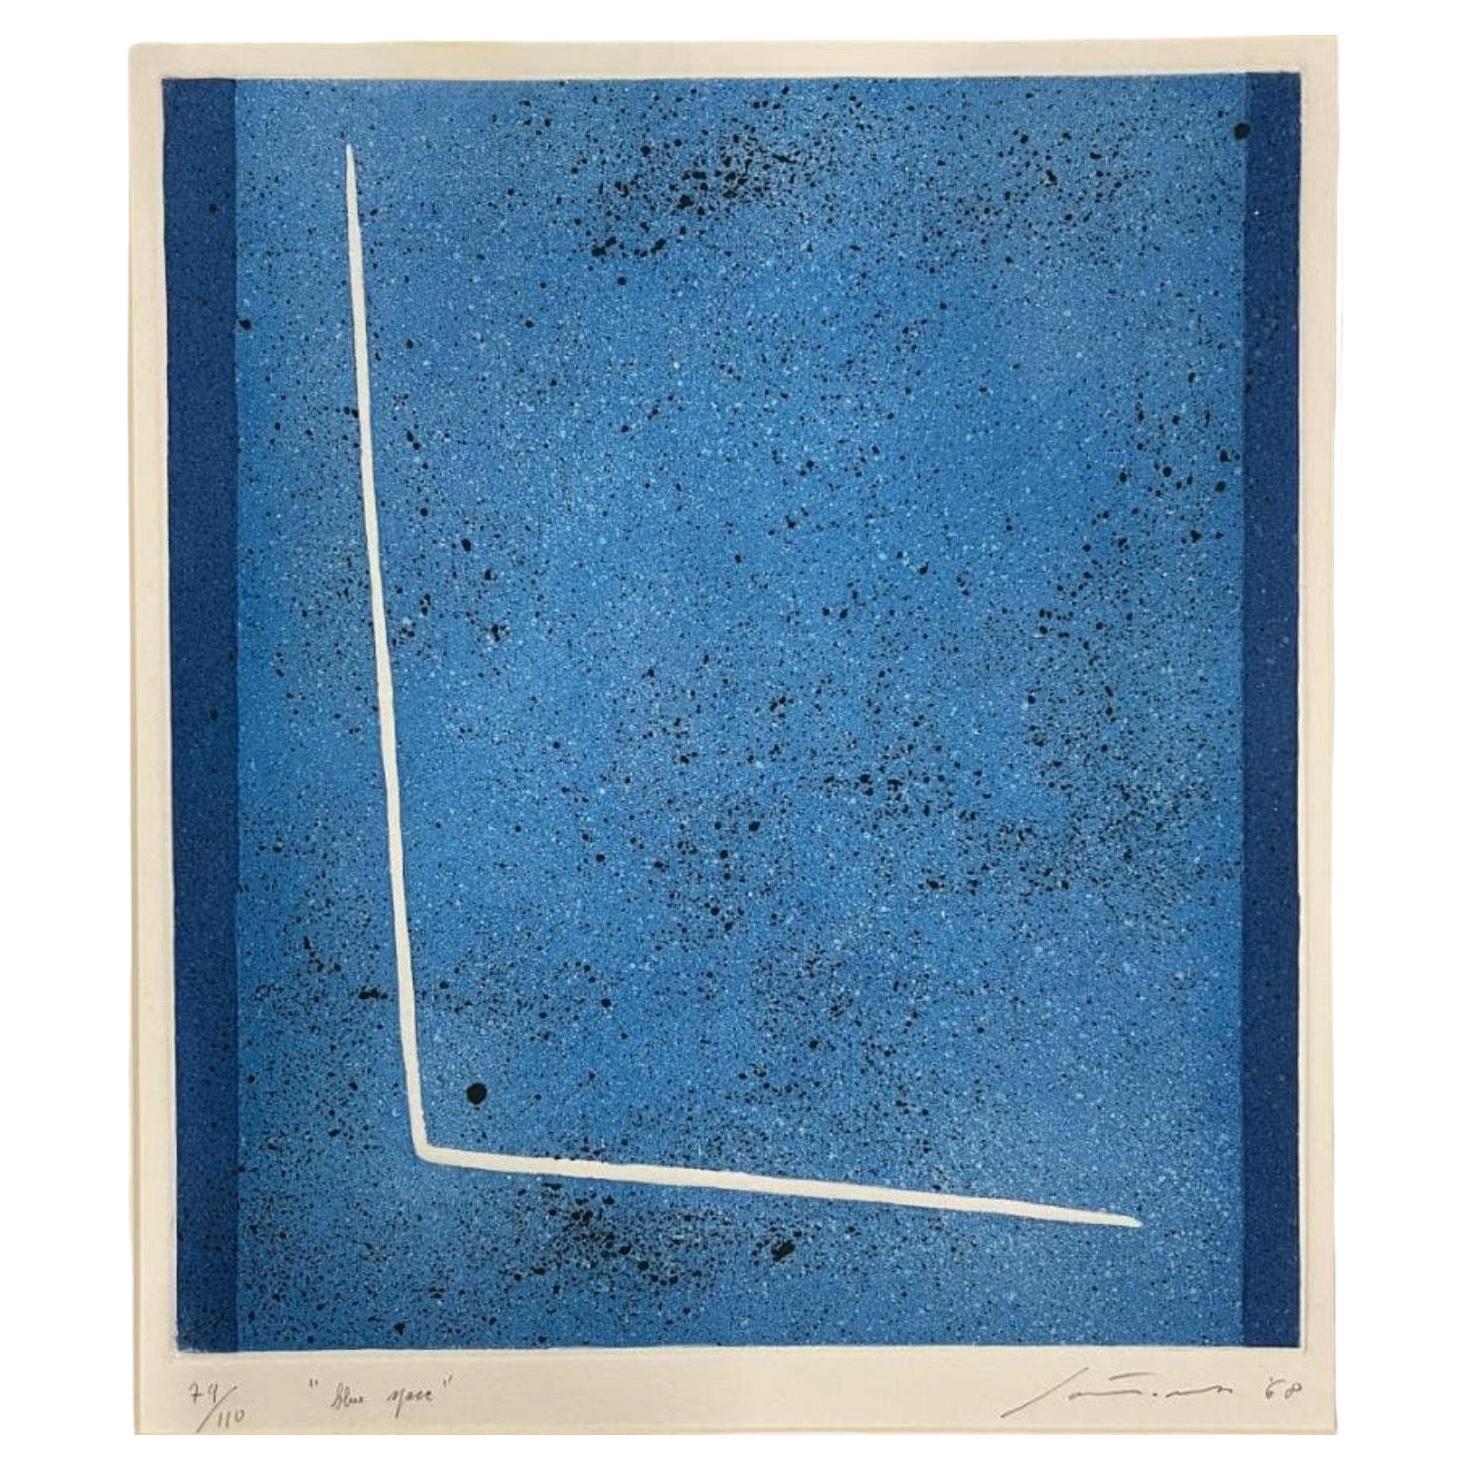 Guiseppe Santomaso (Italian 1907 - 1990) Signed, "Blue Space" Lithograph, 1969. 